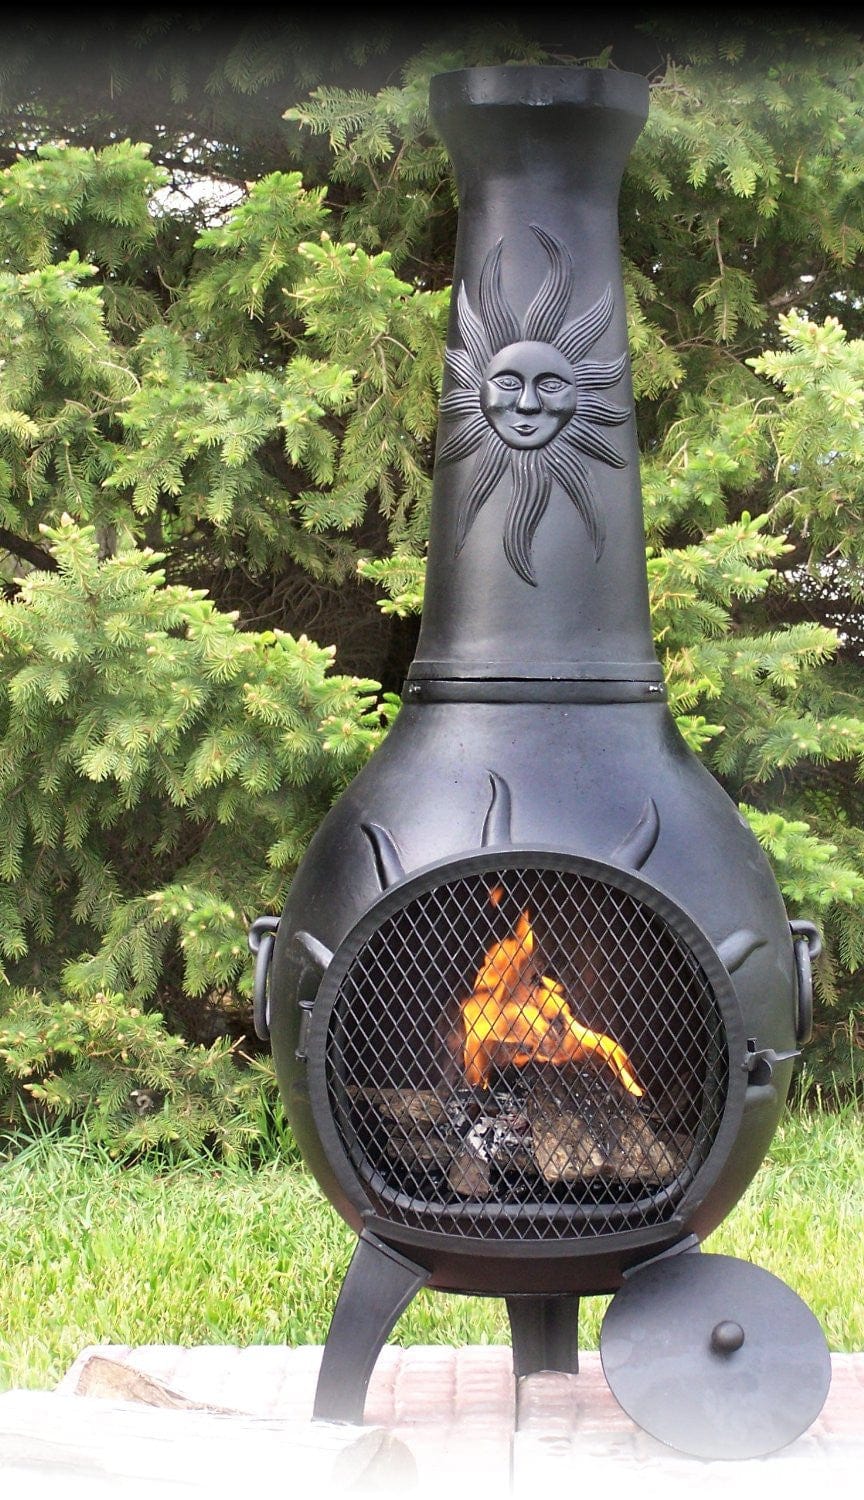 The Blue Rooster Sun Chiminea in Cast Iron